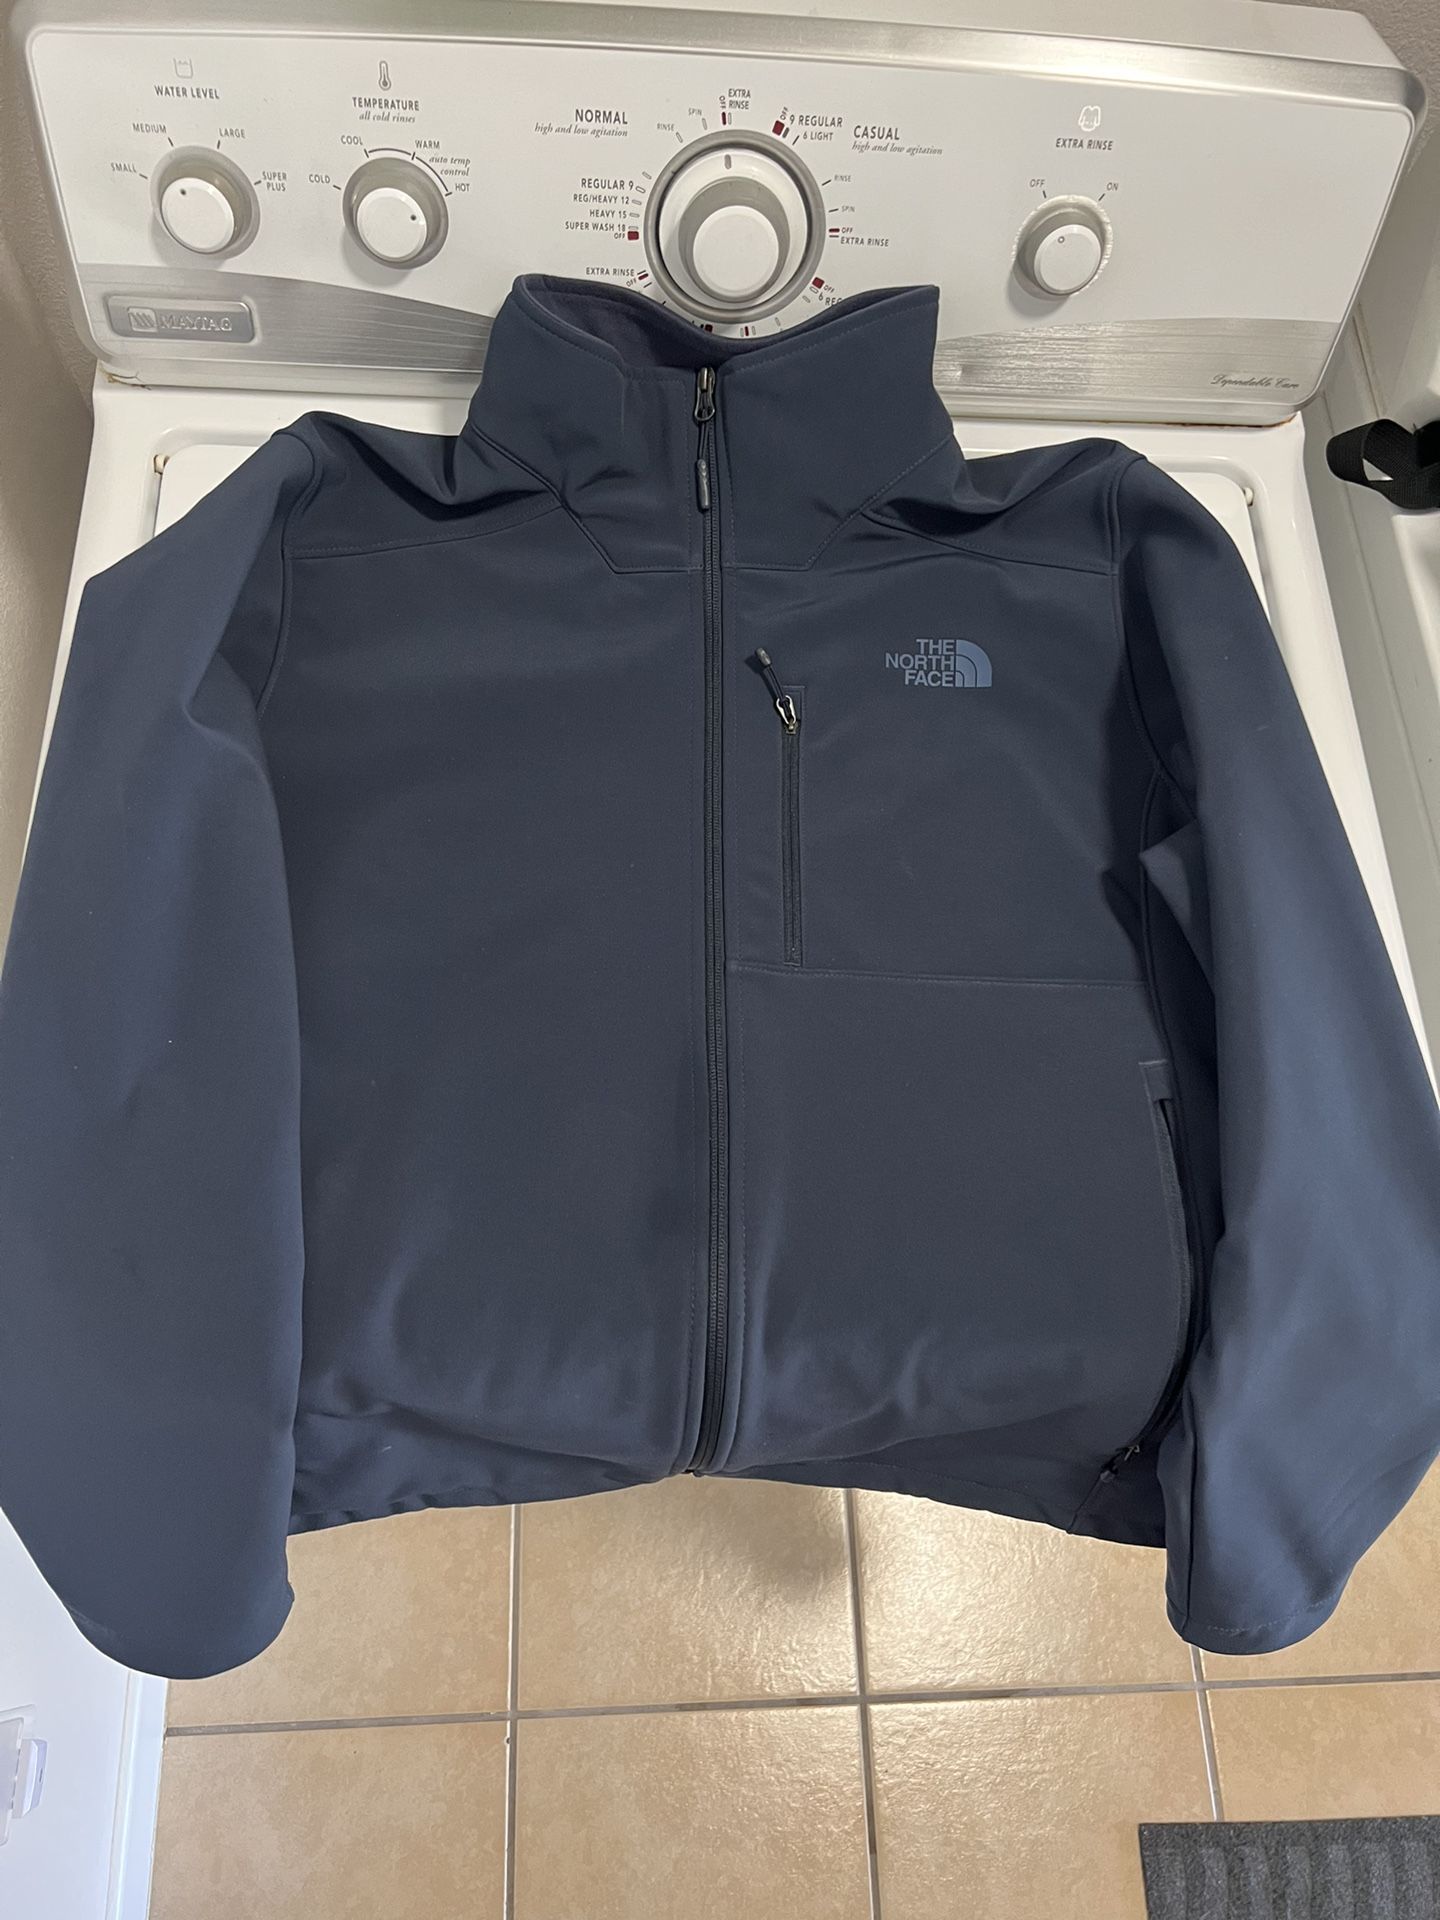 The north face jacket size Lg 